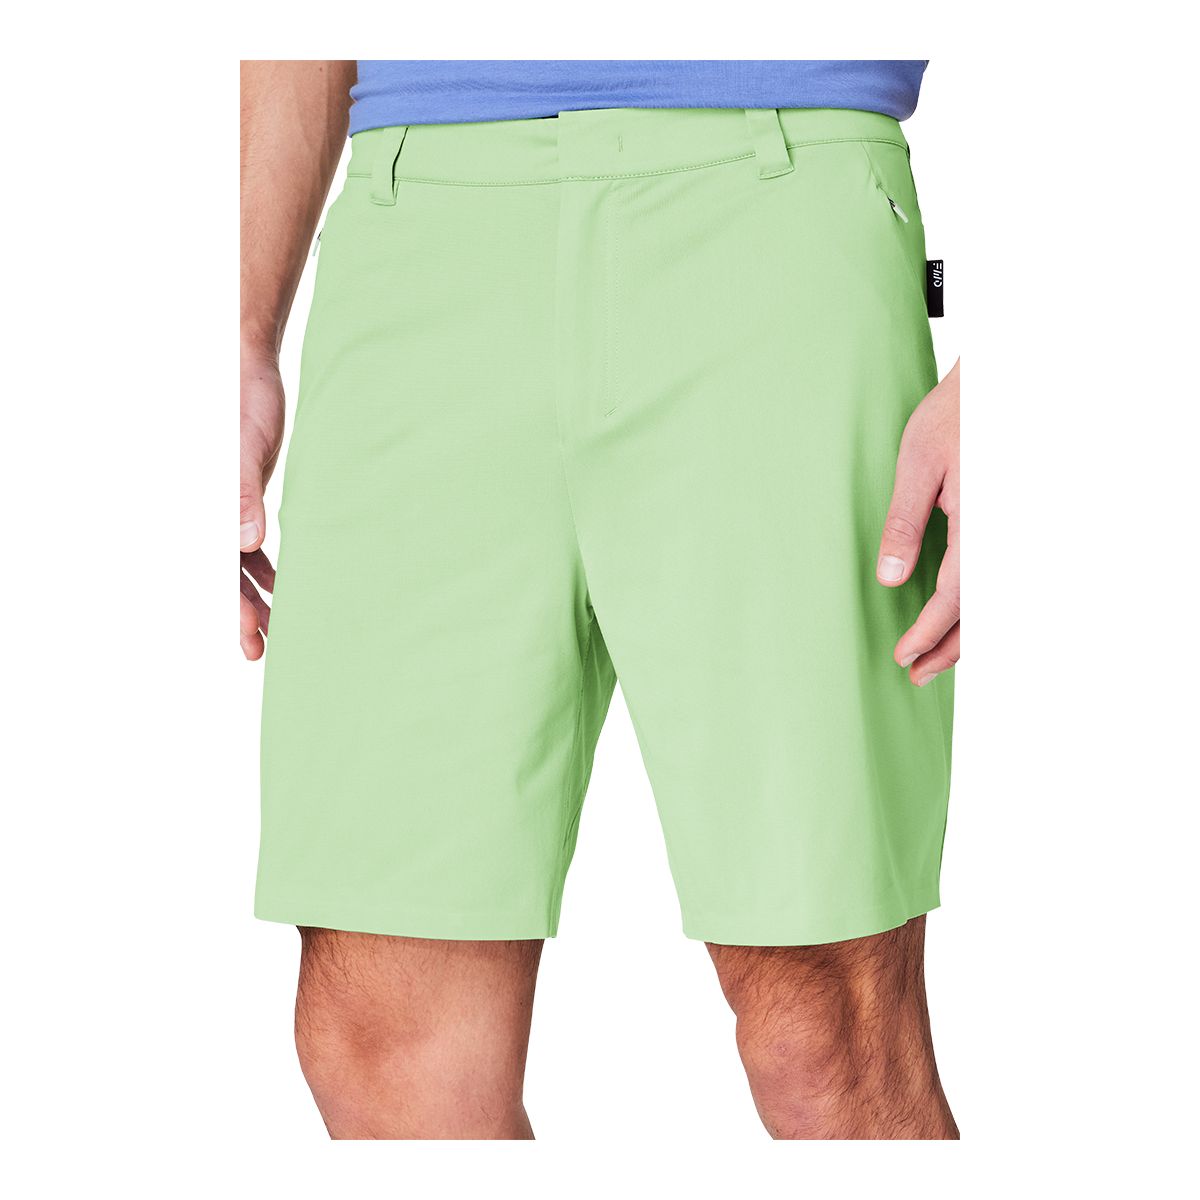 Image of FWD Men's Friday FWD Motionfit 8 Inch Hybrid Shorts